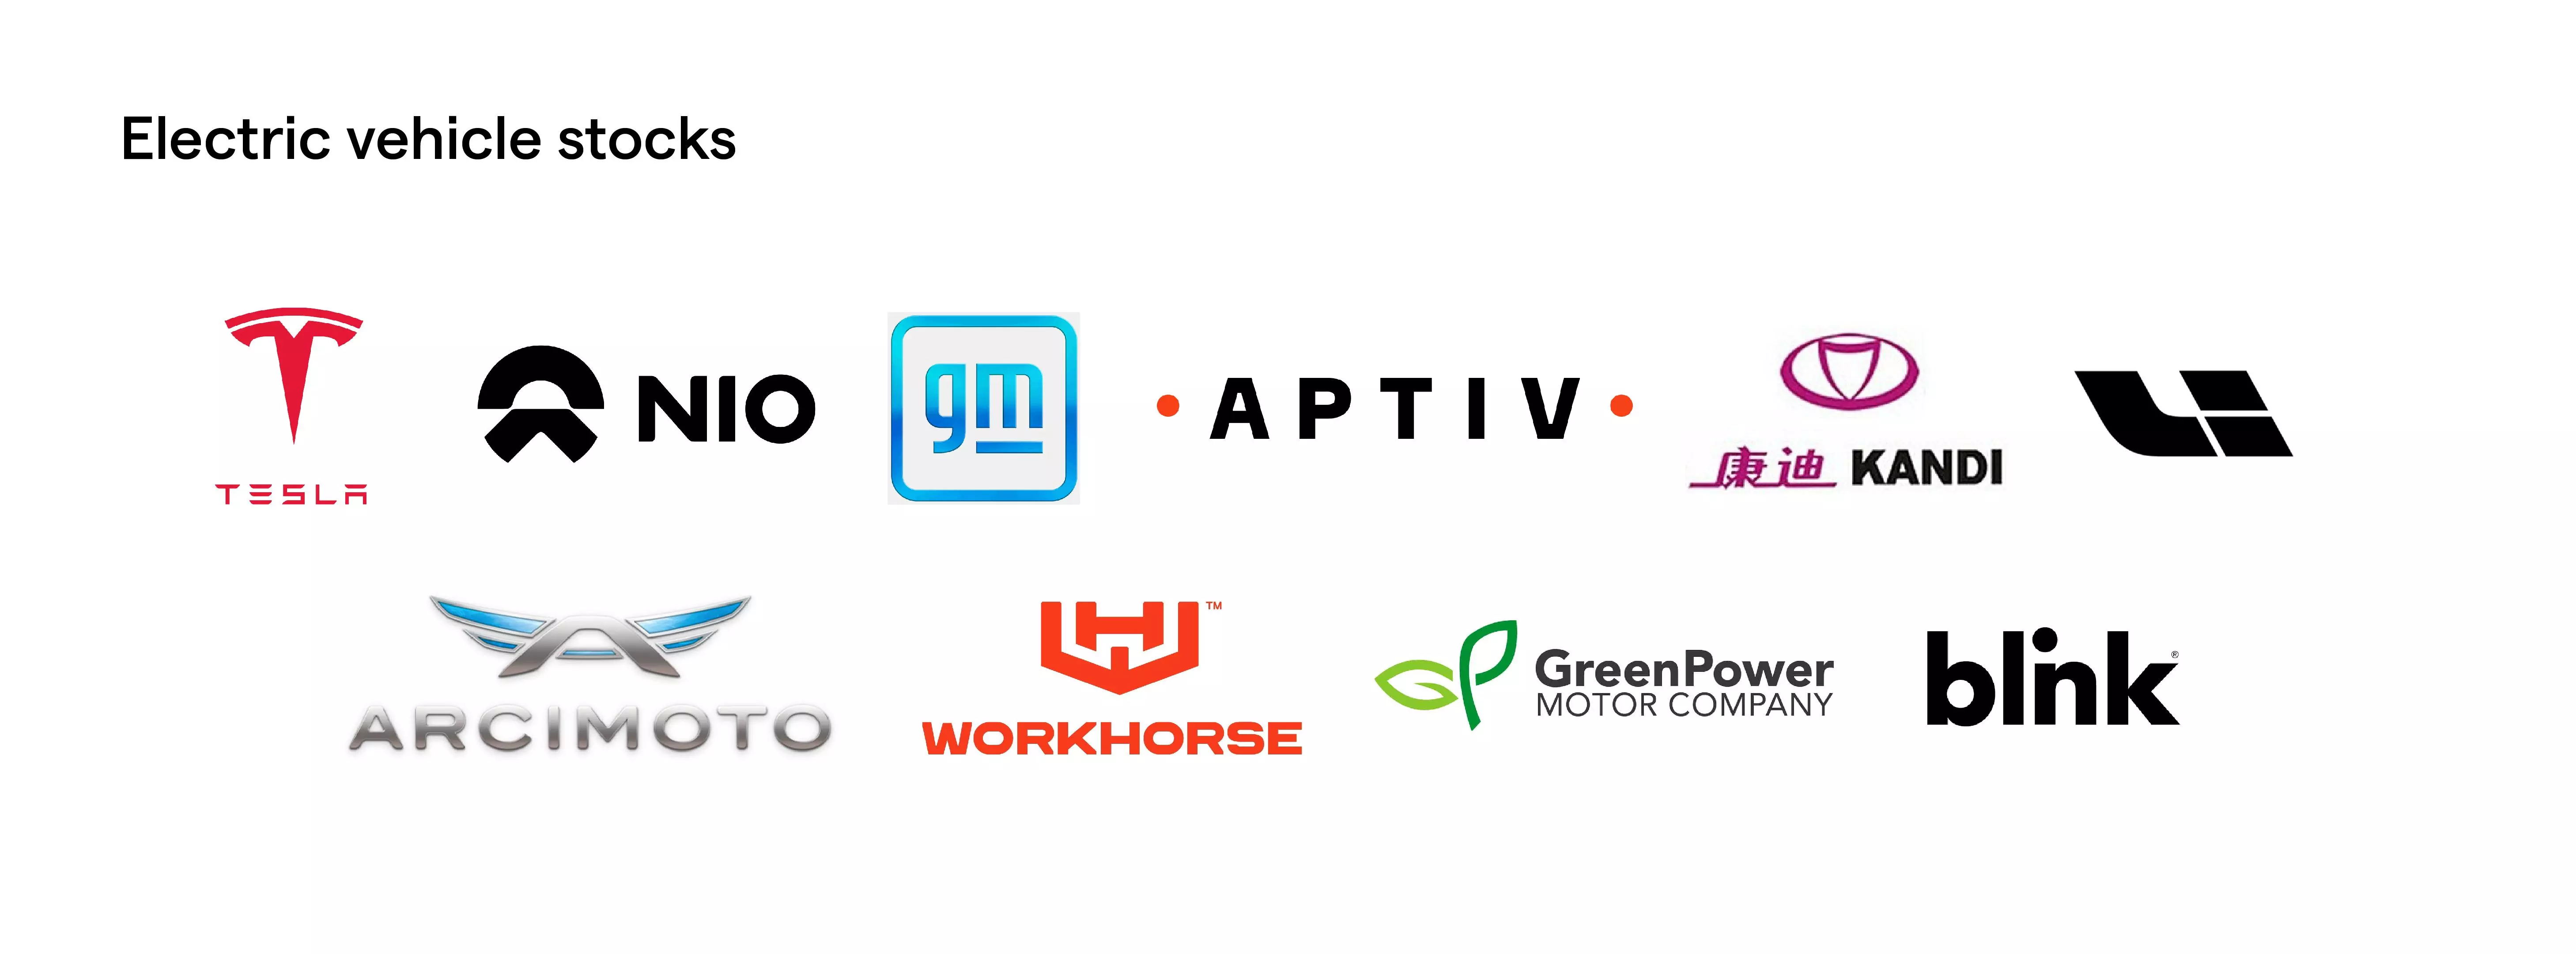 EV stocks and their brand names all together